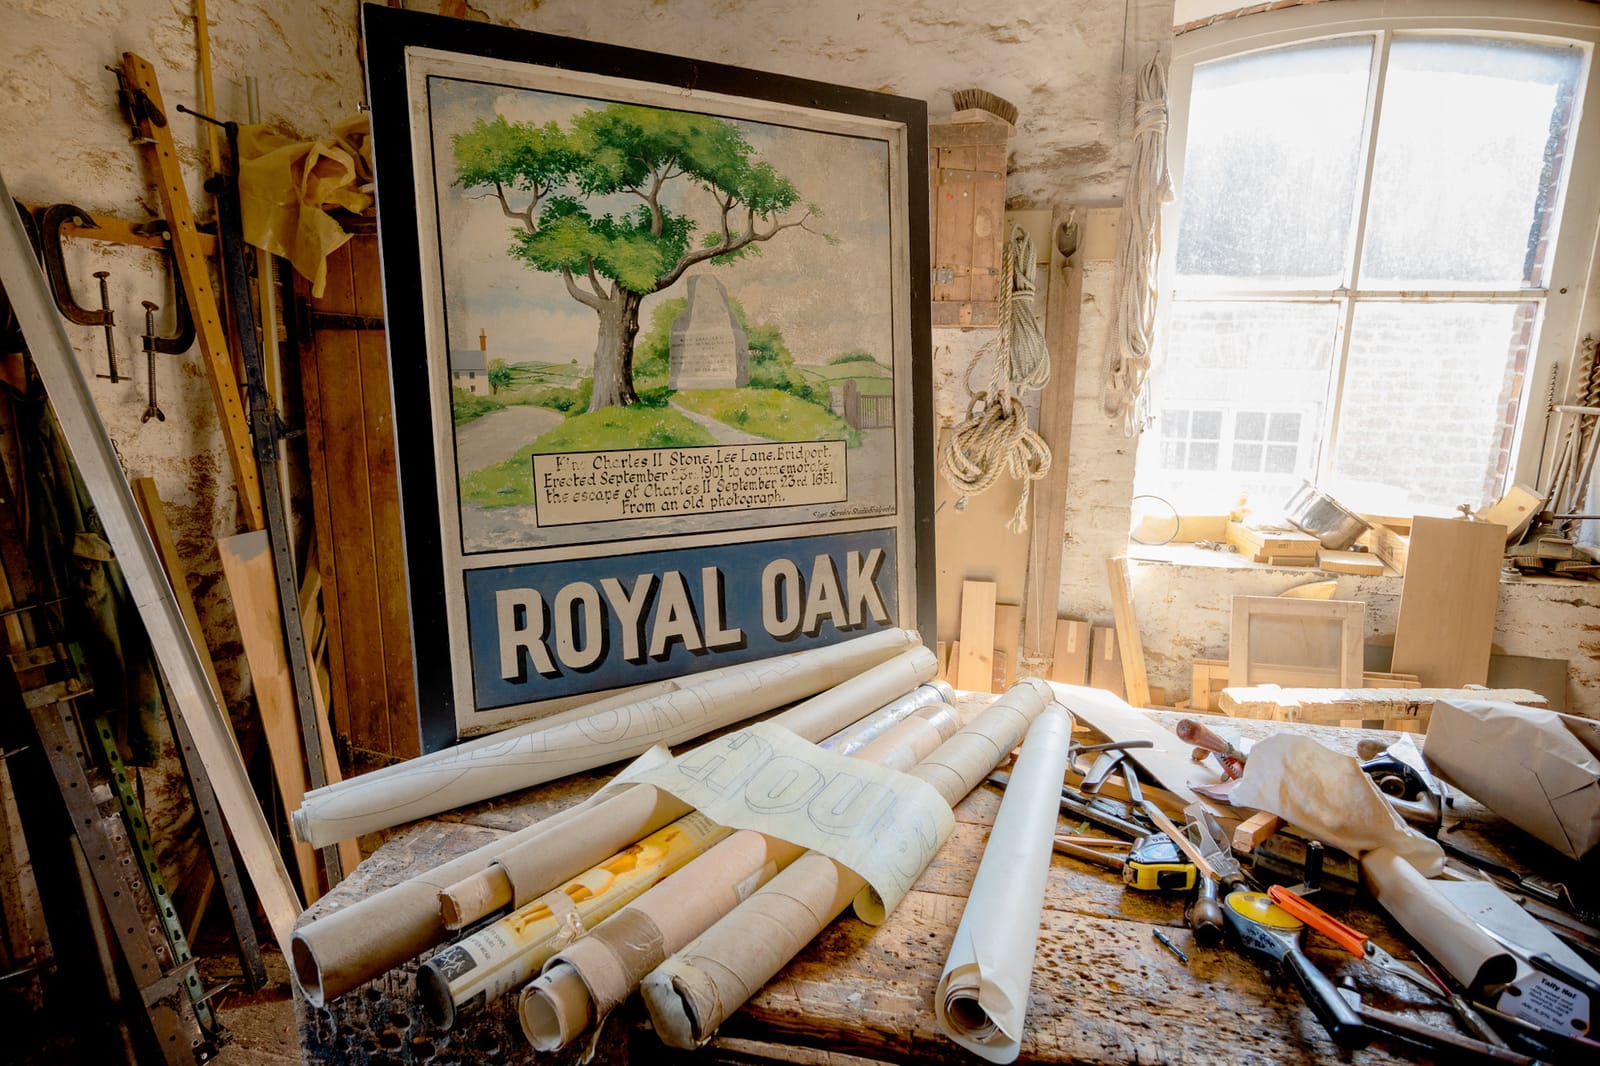 A painted sign for the Royal Oak pub with the name in block letters along the bottom and a pictorial of an oak tree and a rural scene above that. The sign is propped up behind a work bench that is covered with rolls of paper and a variety of tools. Sunlight is streaming in through a window in the background.